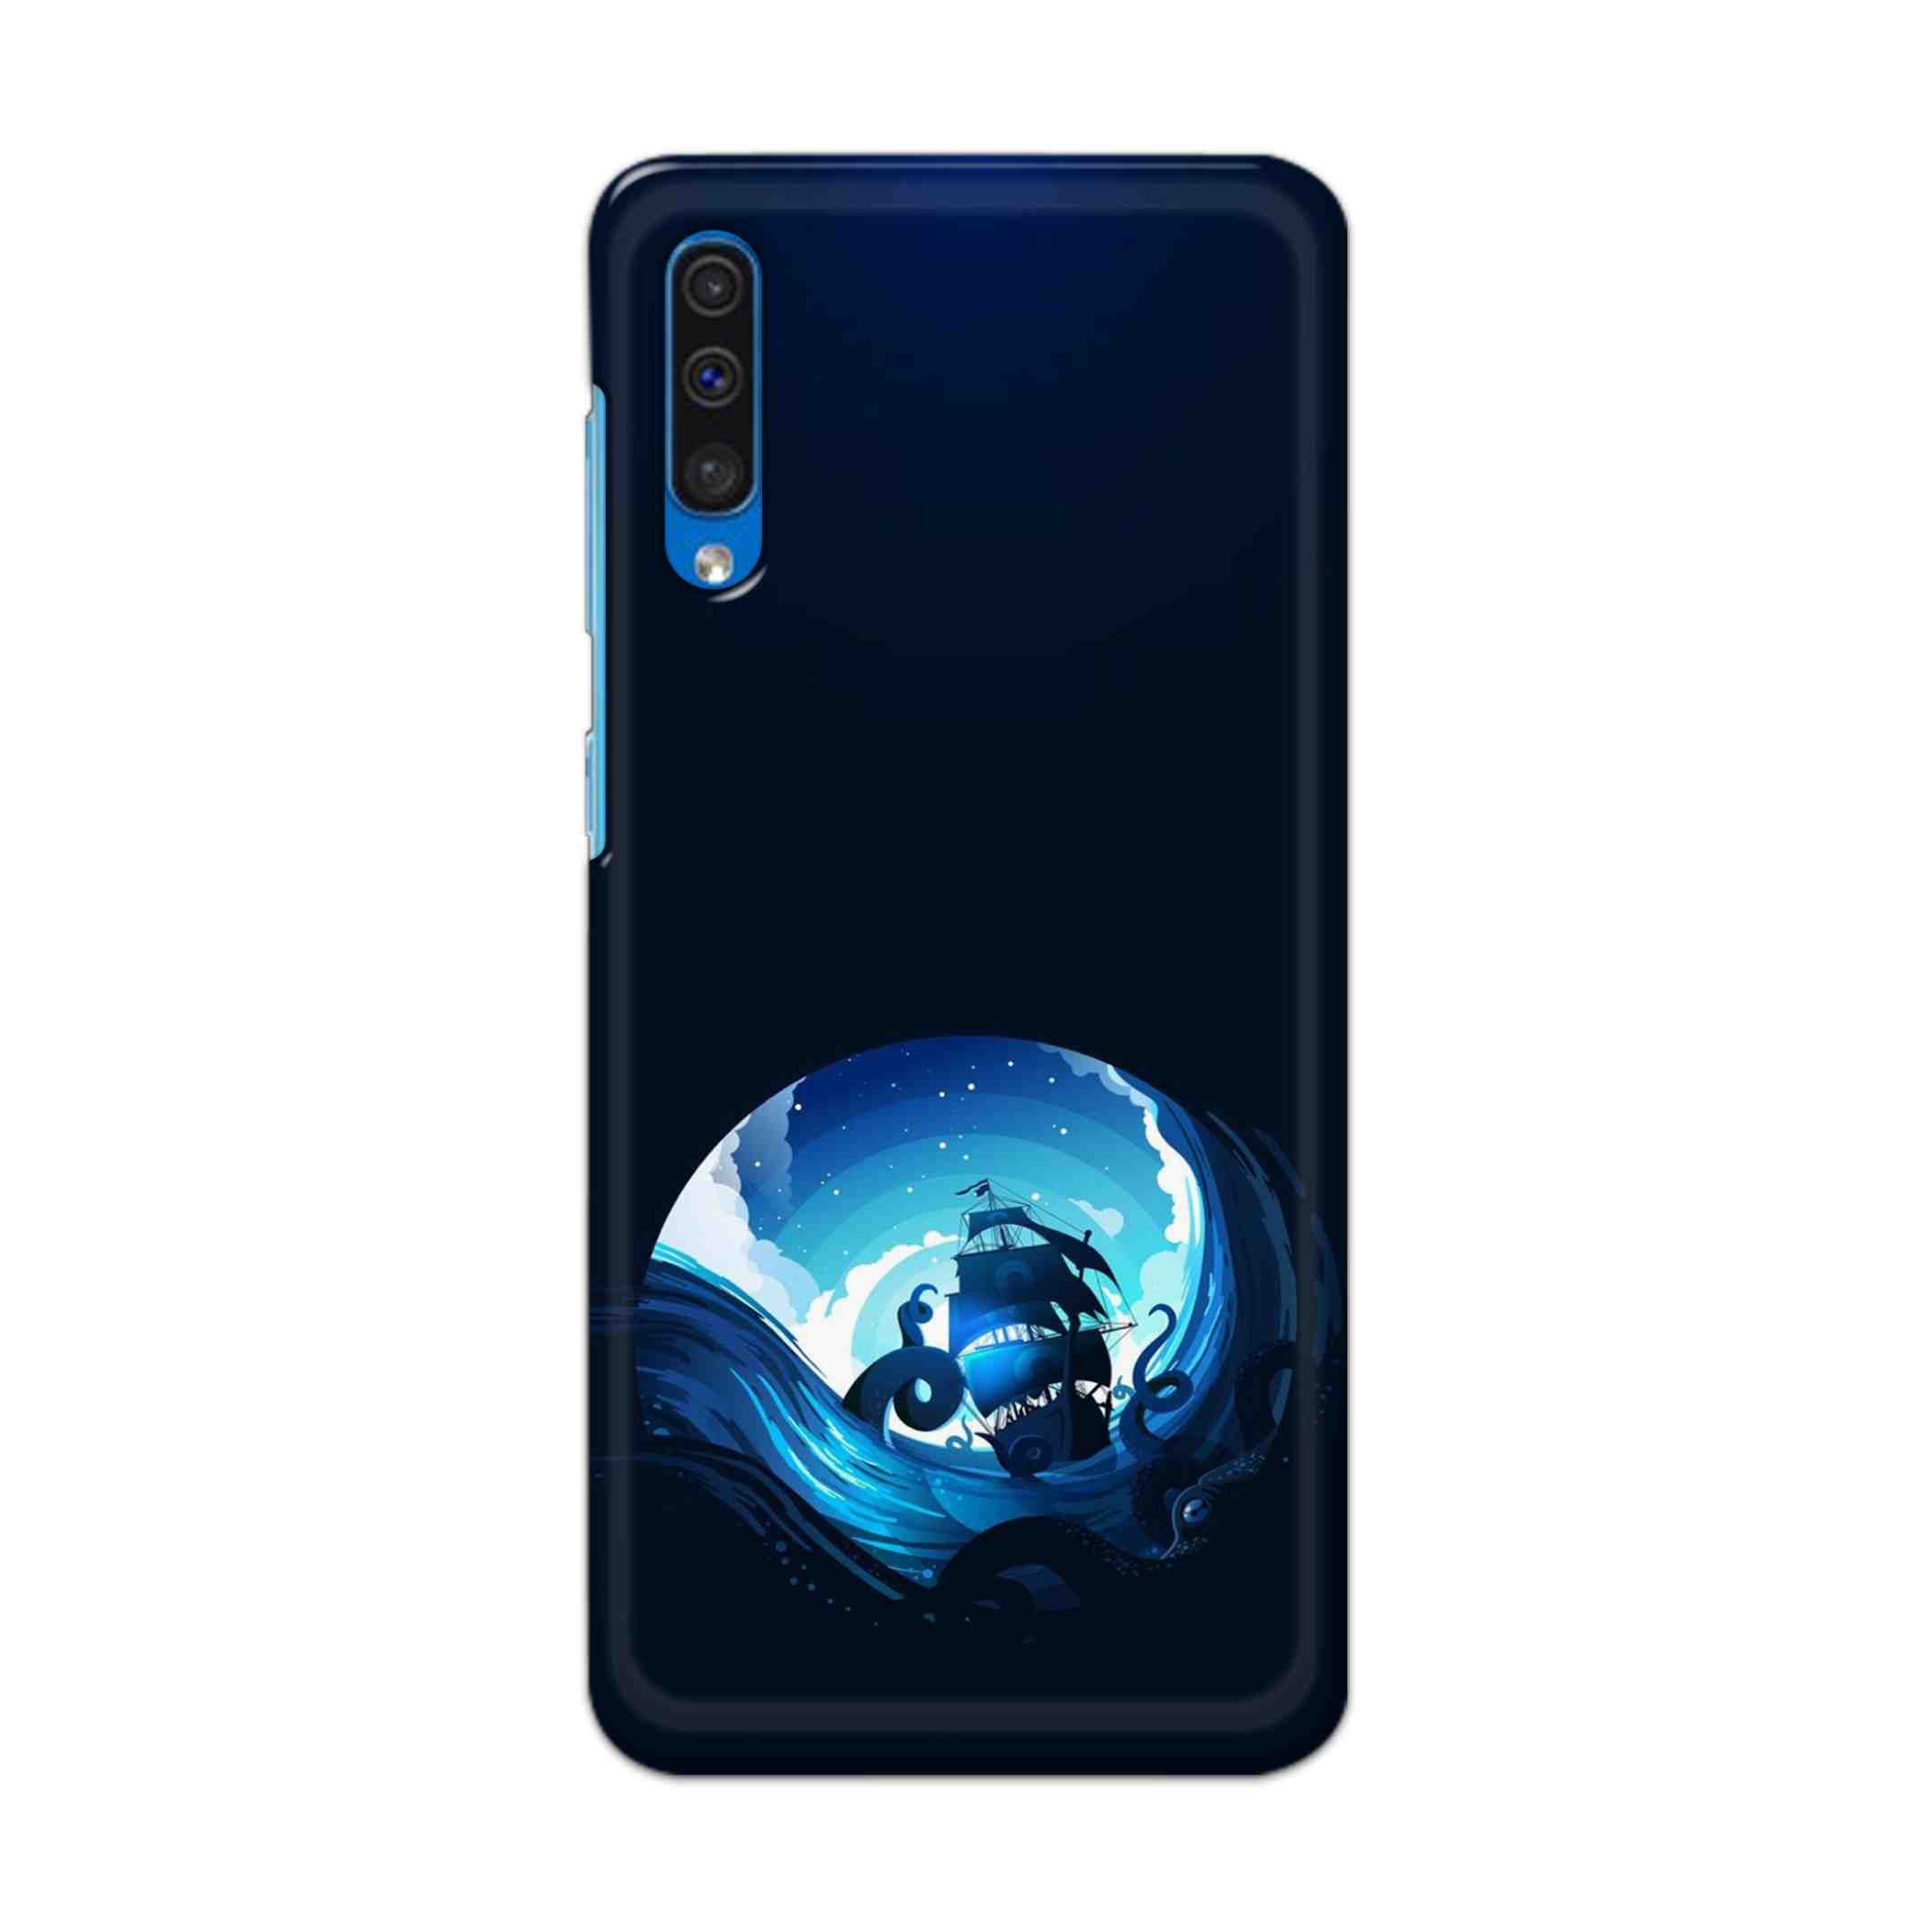 Buy Blue Sea Ship Hard Back Mobile Phone Case Cover For Samsung Galaxy A50 / A50s / A30s Online